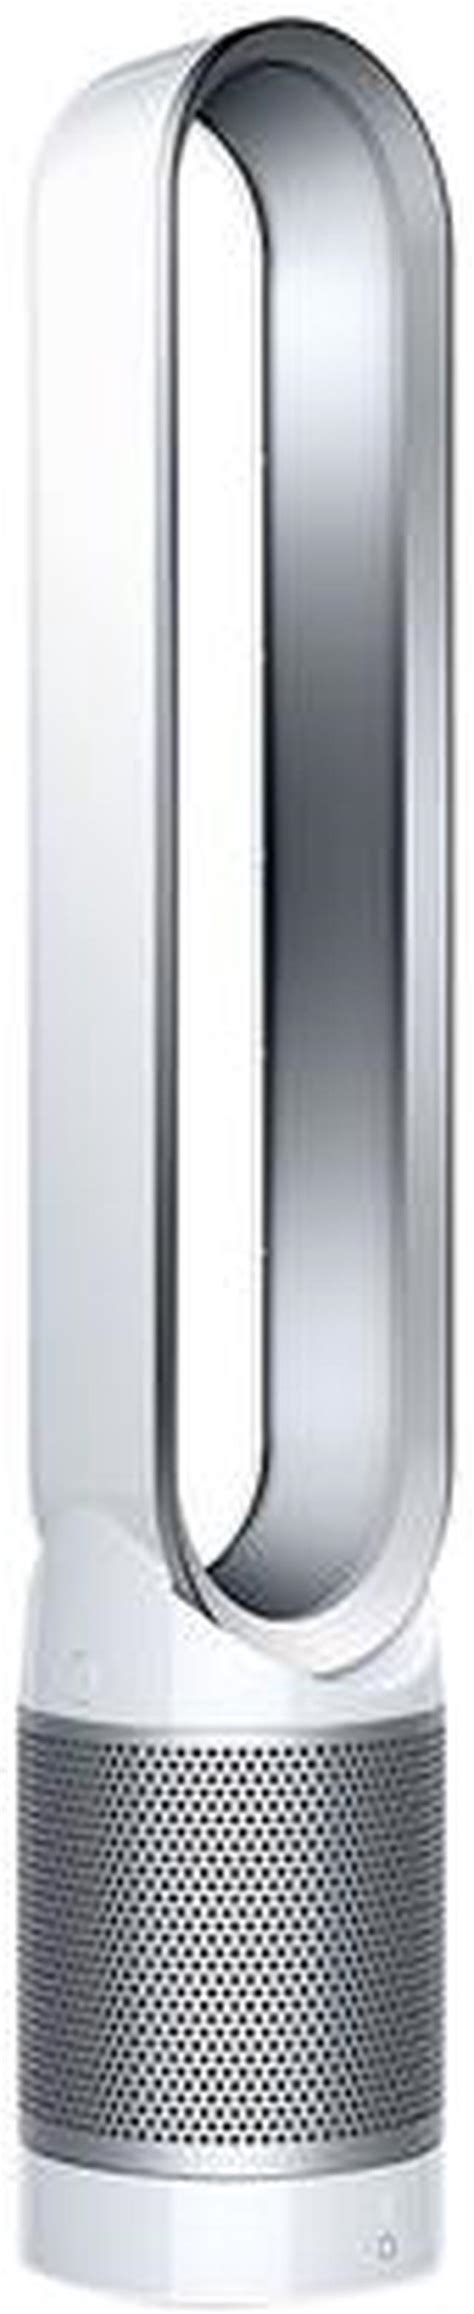 Dyson Tp02 Pure Cool Link Connected Tower Air Purifier Fan Ph